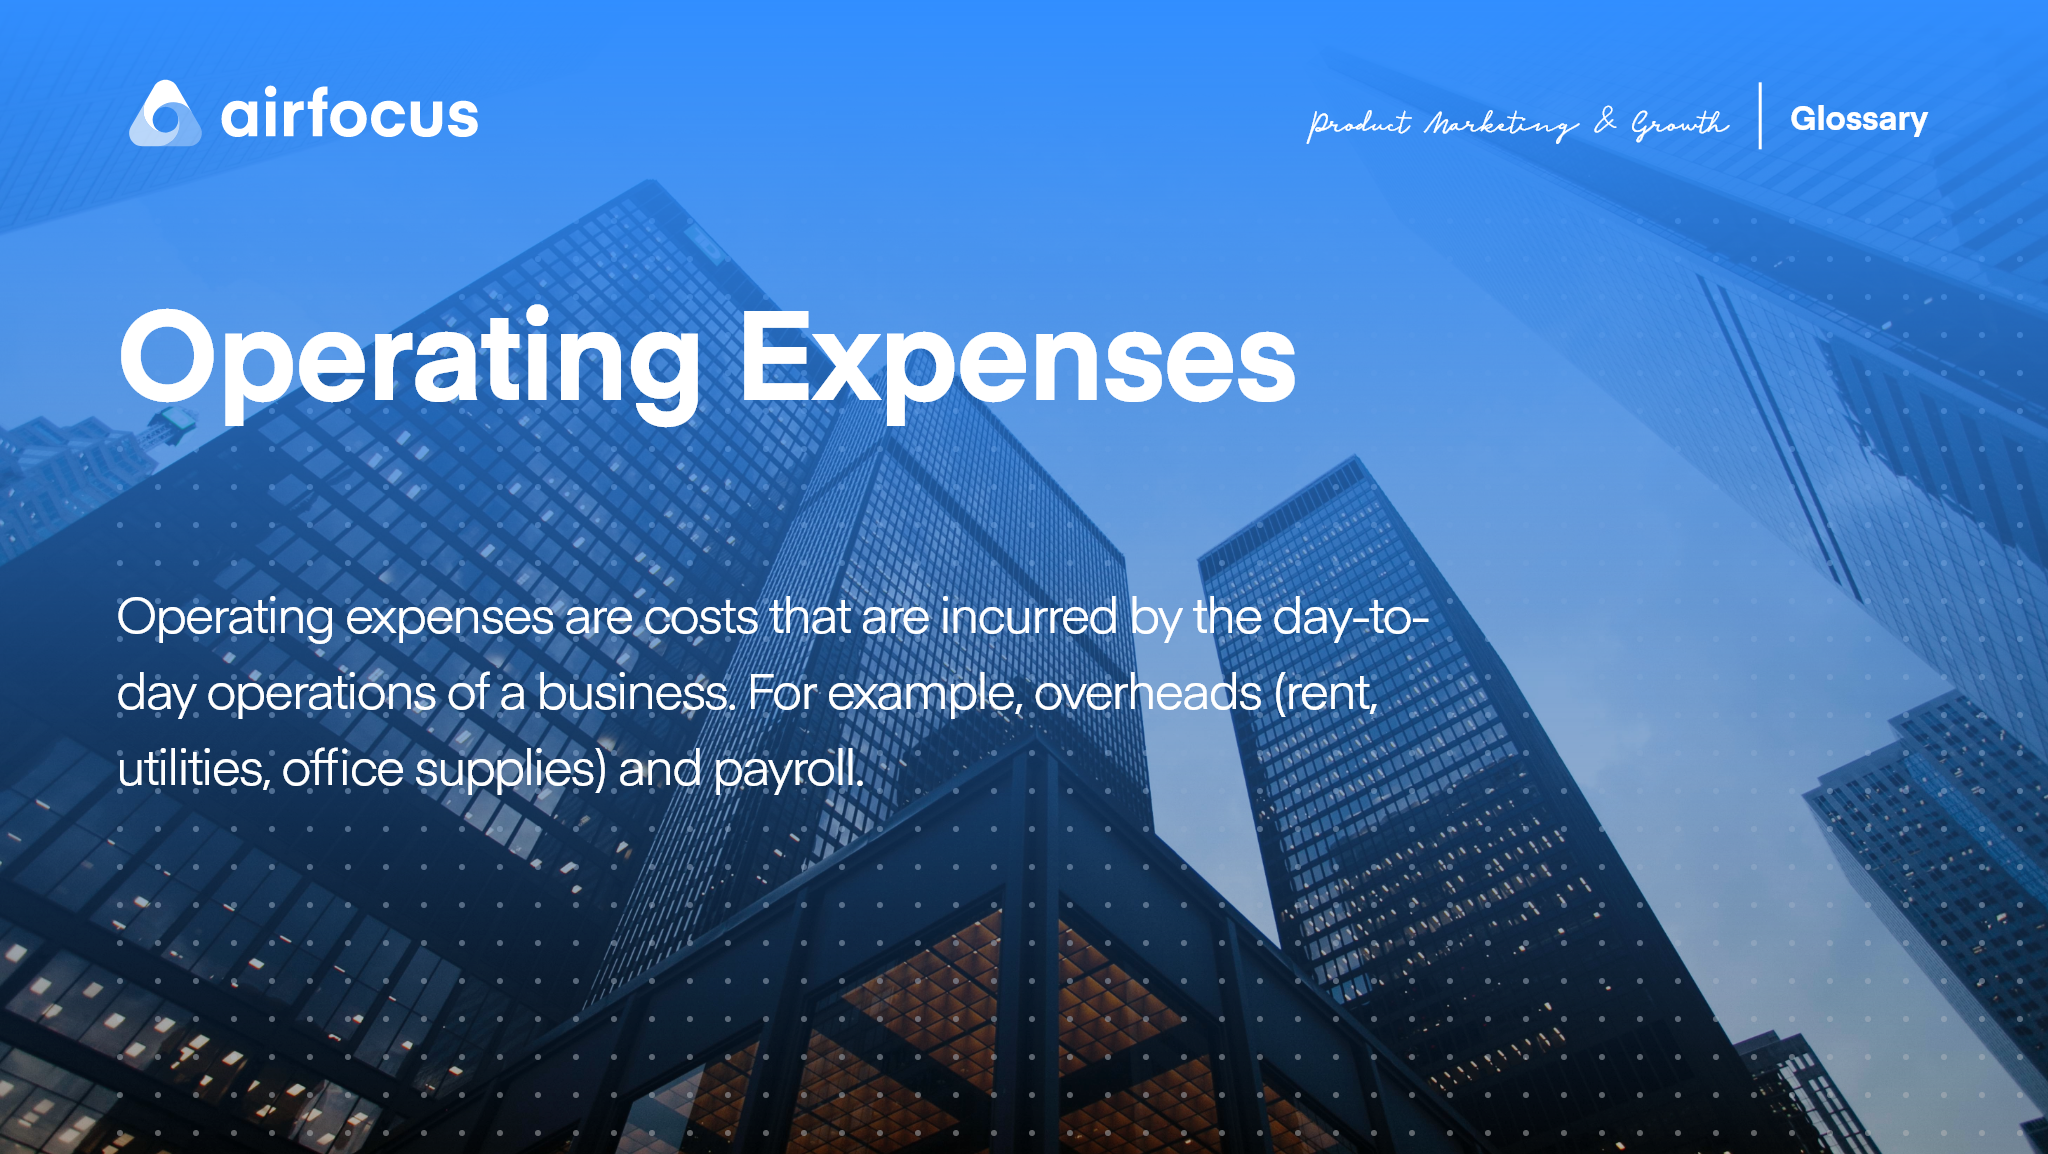 total operating expenses meaning